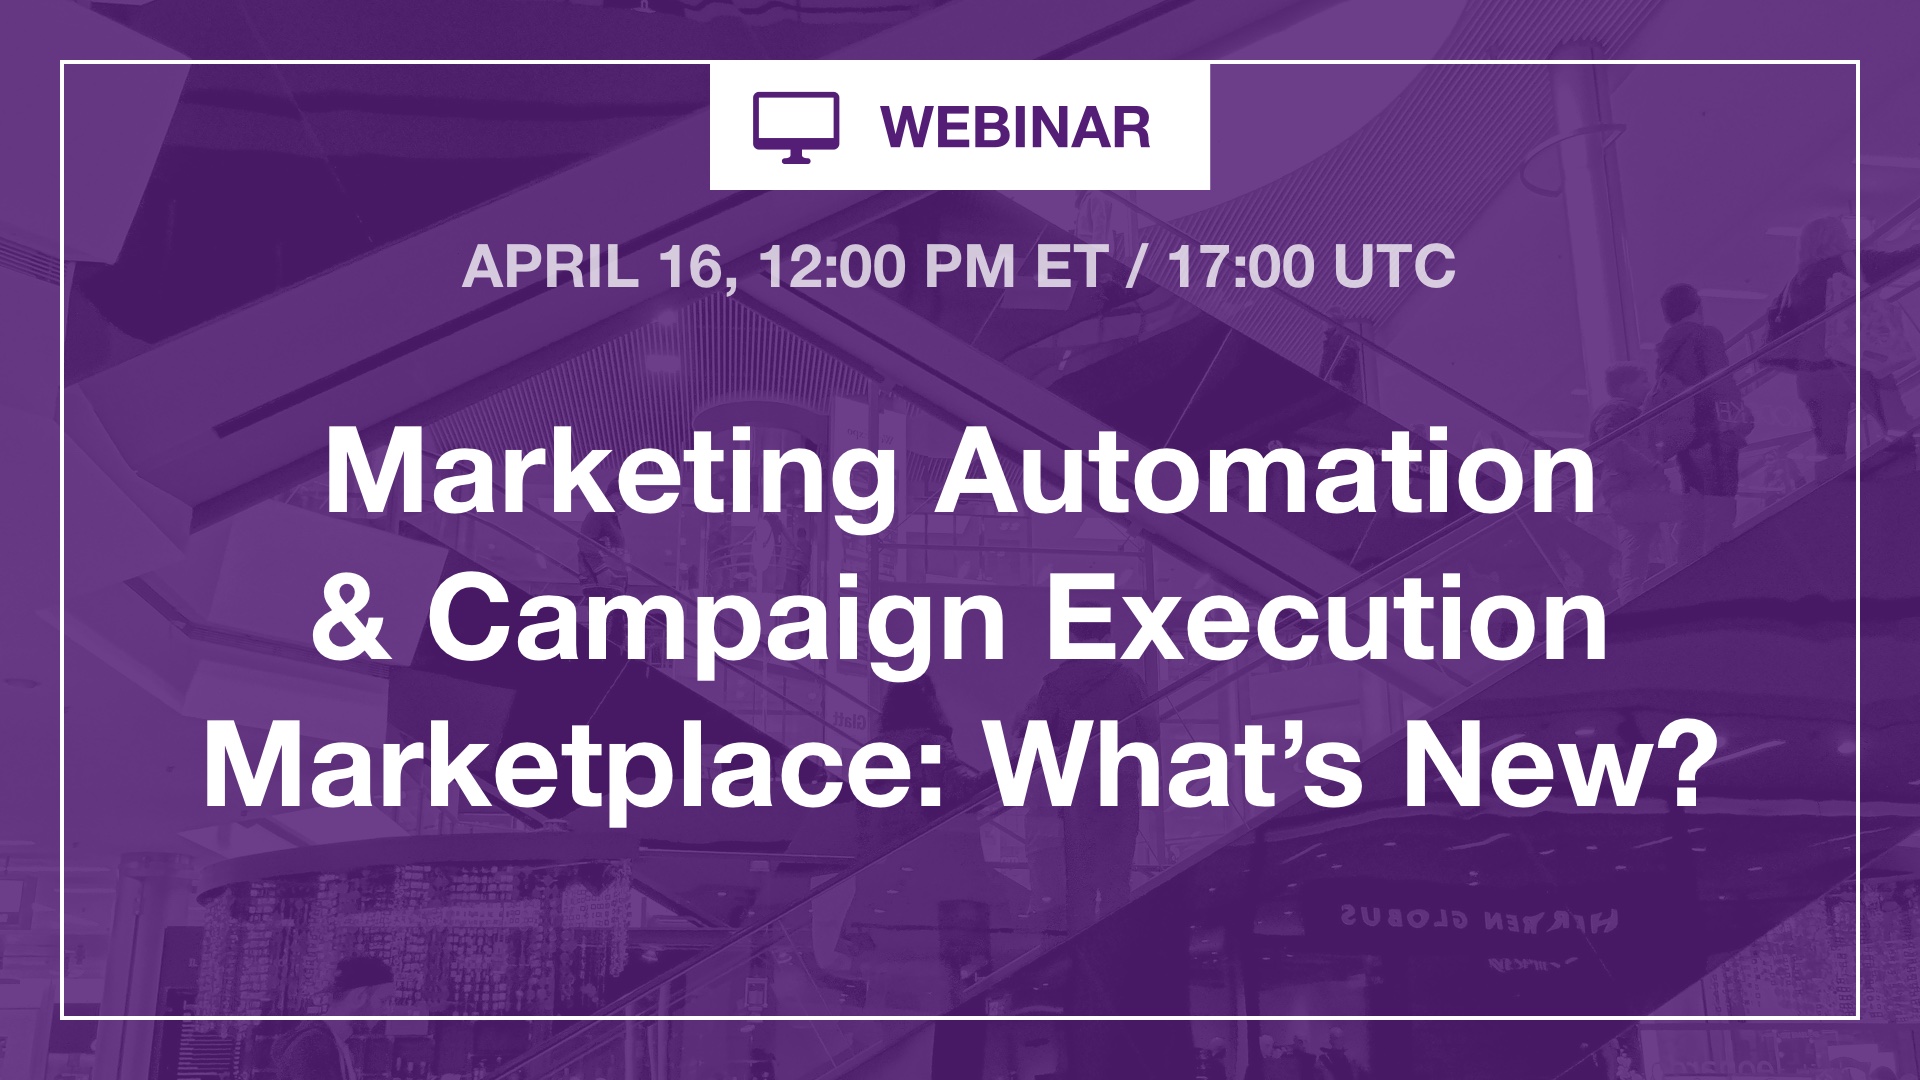 [Webinar] What's New in Marketing Automation & Campaign Execution Marketplace